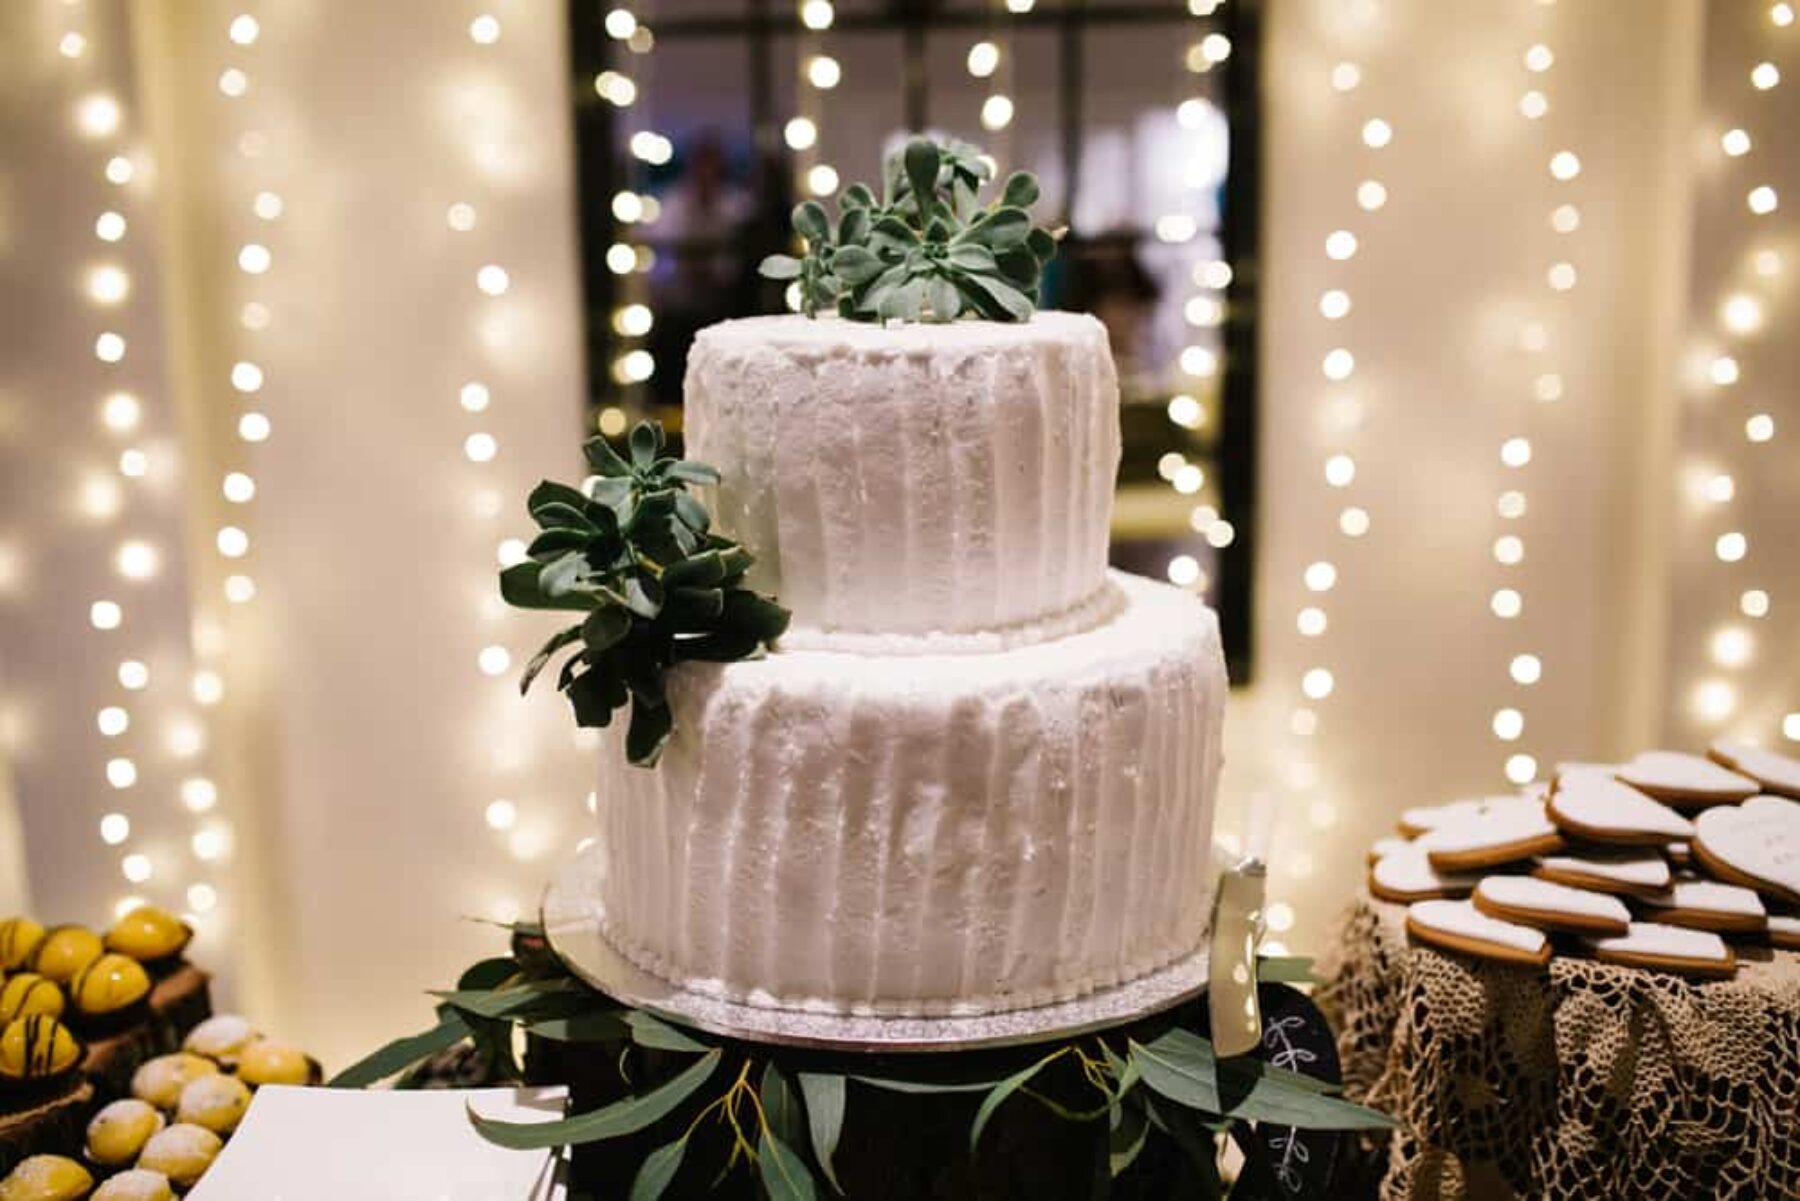 homemade wedding cake with succulent cake topper